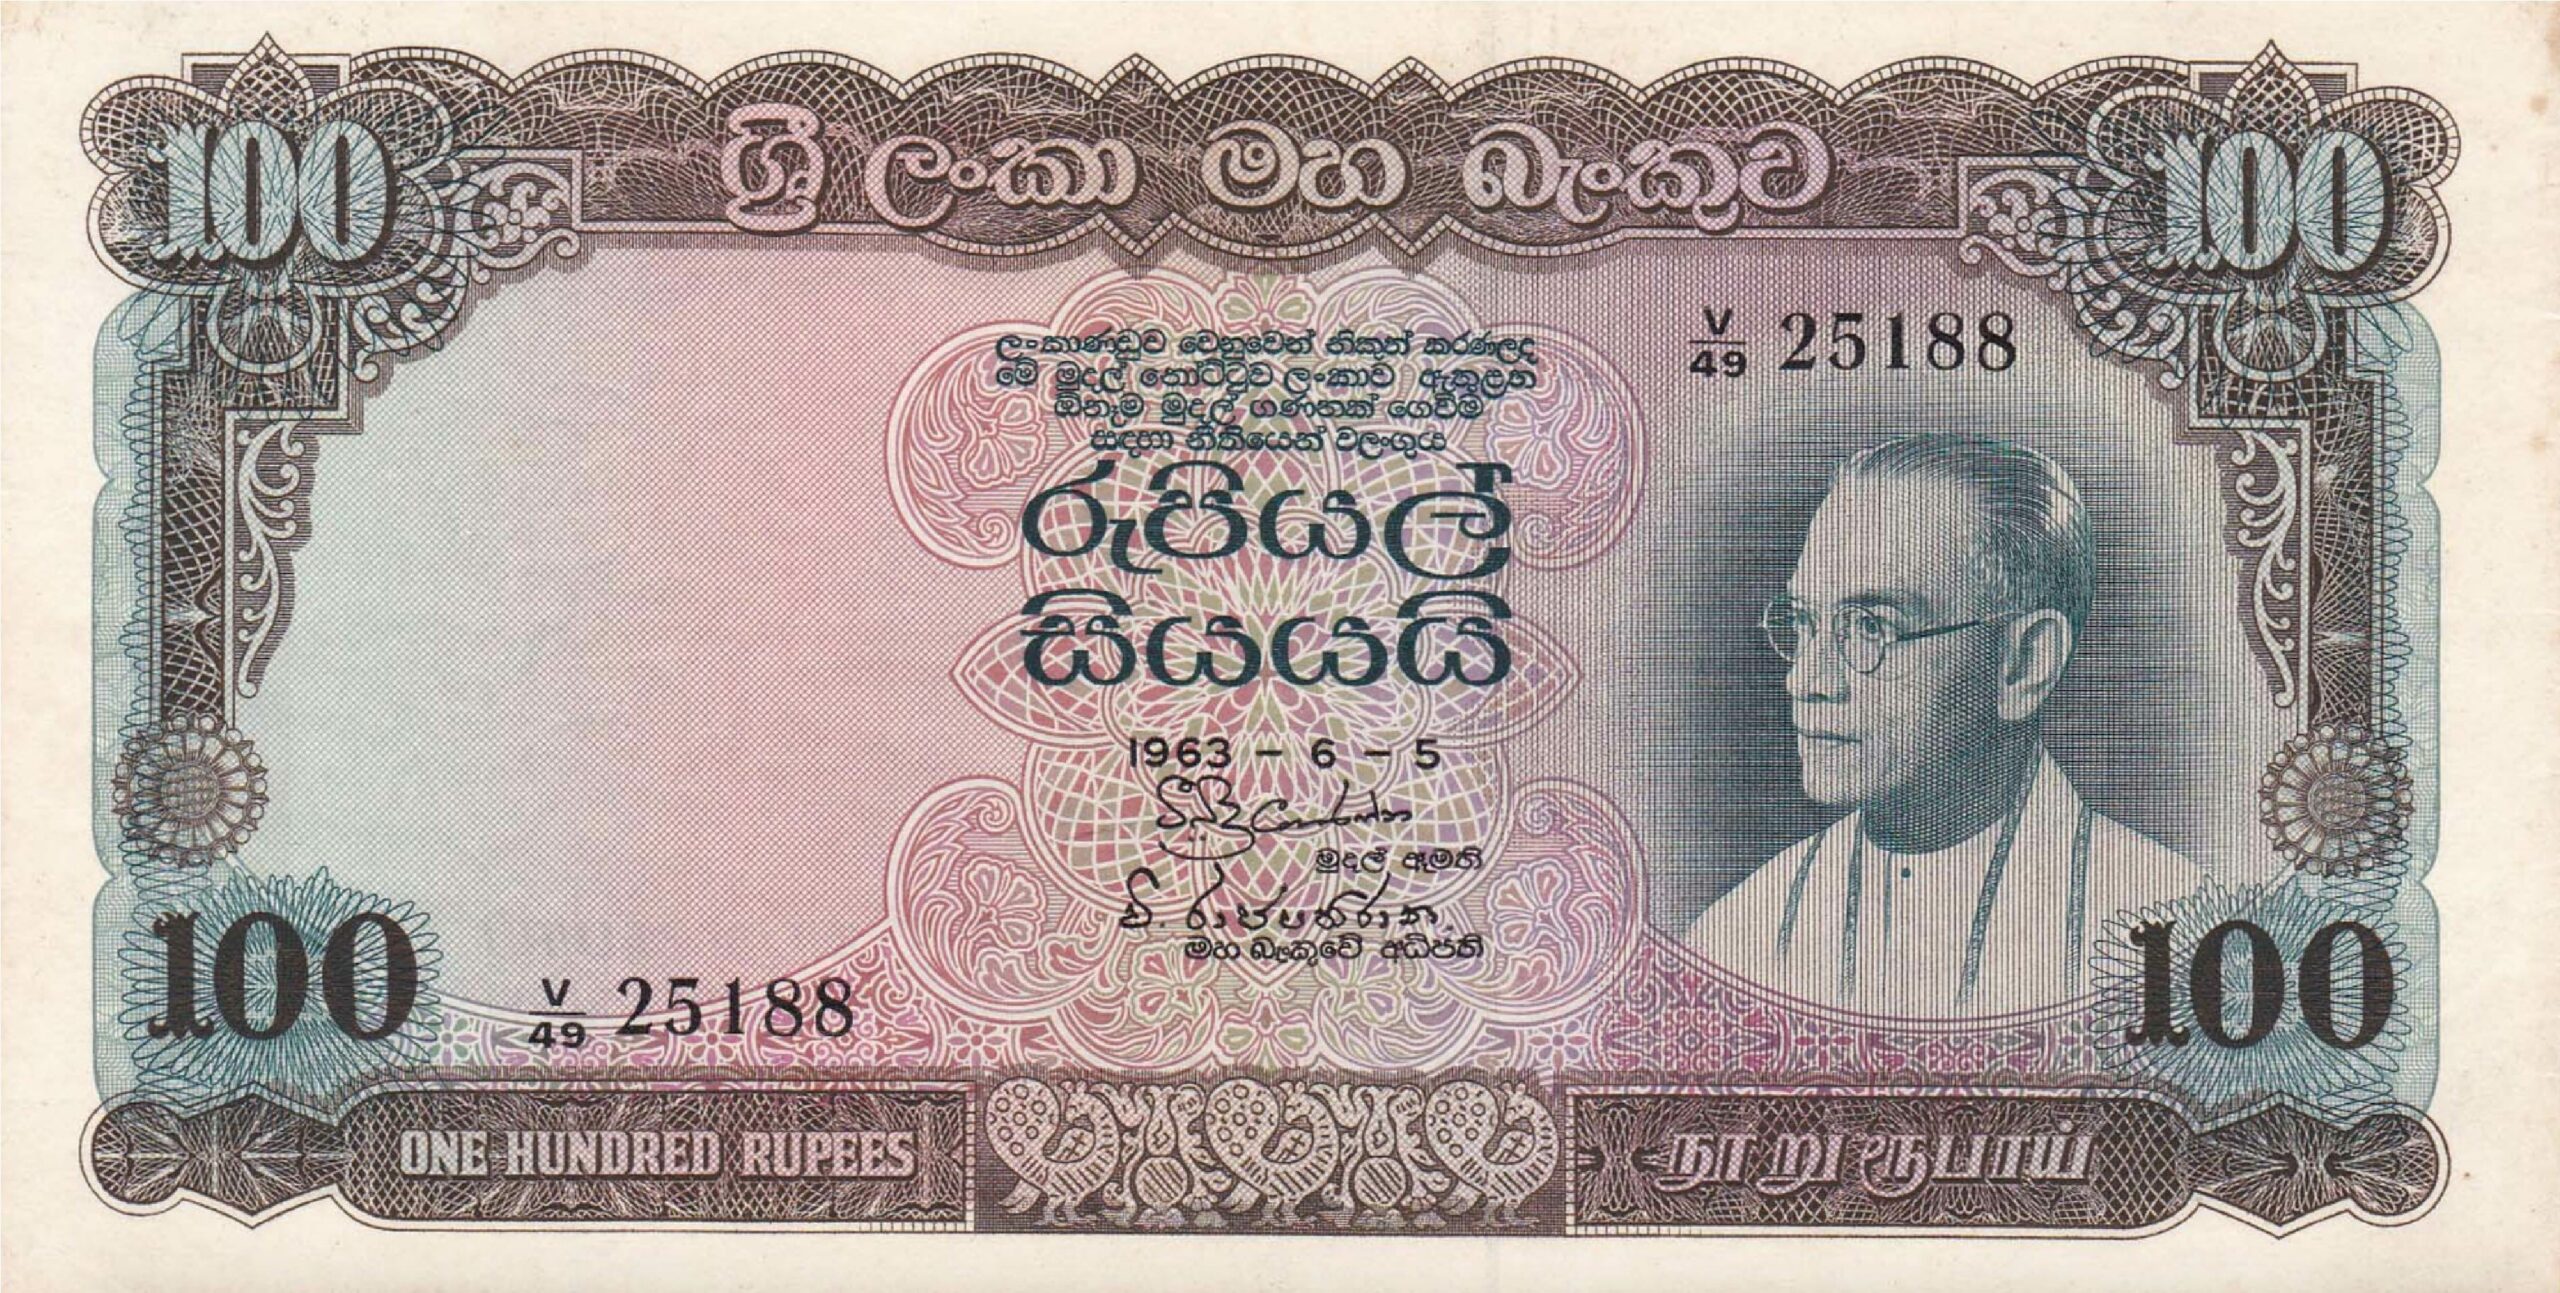 100 rupees Central Bank of Ceylon banknote (S.W.R.D. Bandaranaike portrait series)